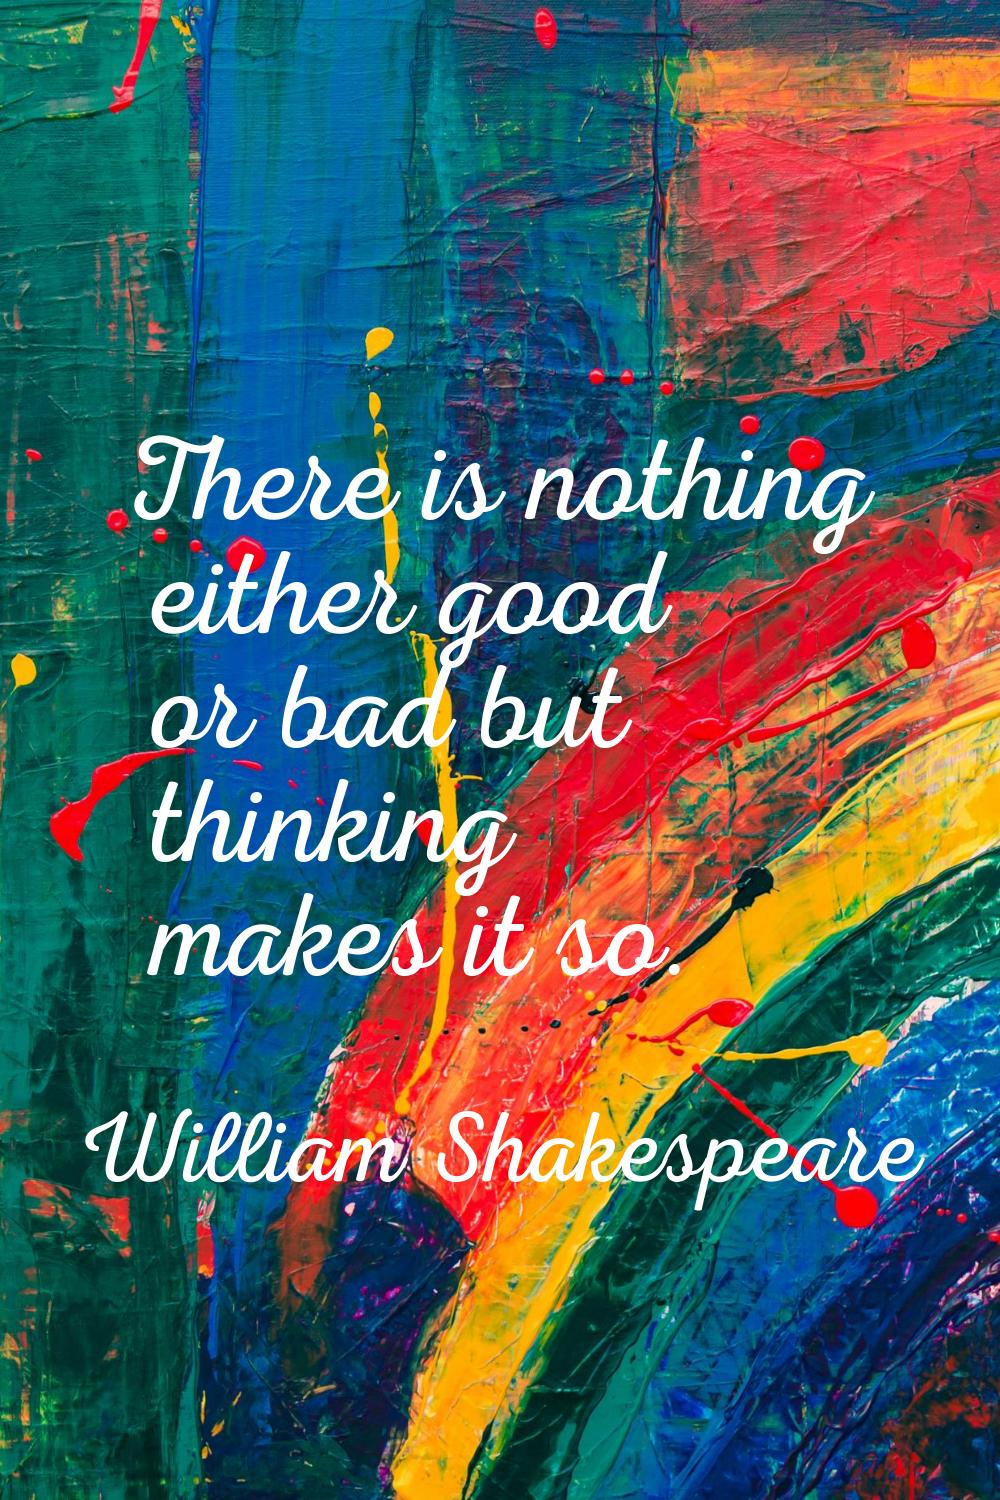 There is nothing either good or bad but thinking makes it so.